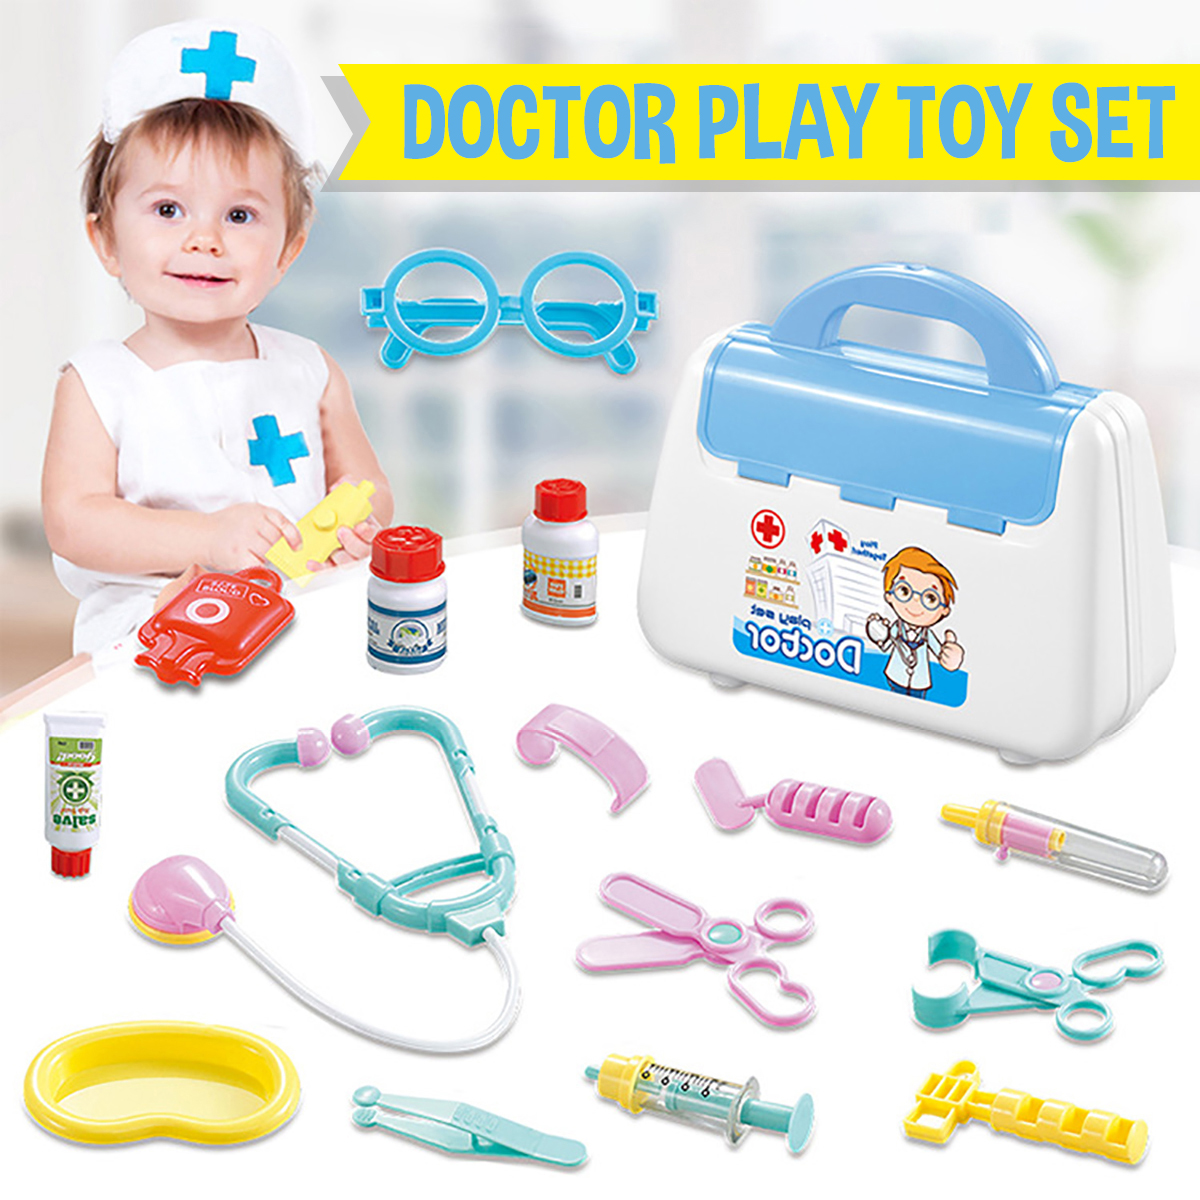 Simulation-Pretend-Doctor-Nurse-Role-Play-Education-Toy-Set-with-Carrying-Box-for-Kids-Gift-1725291-1